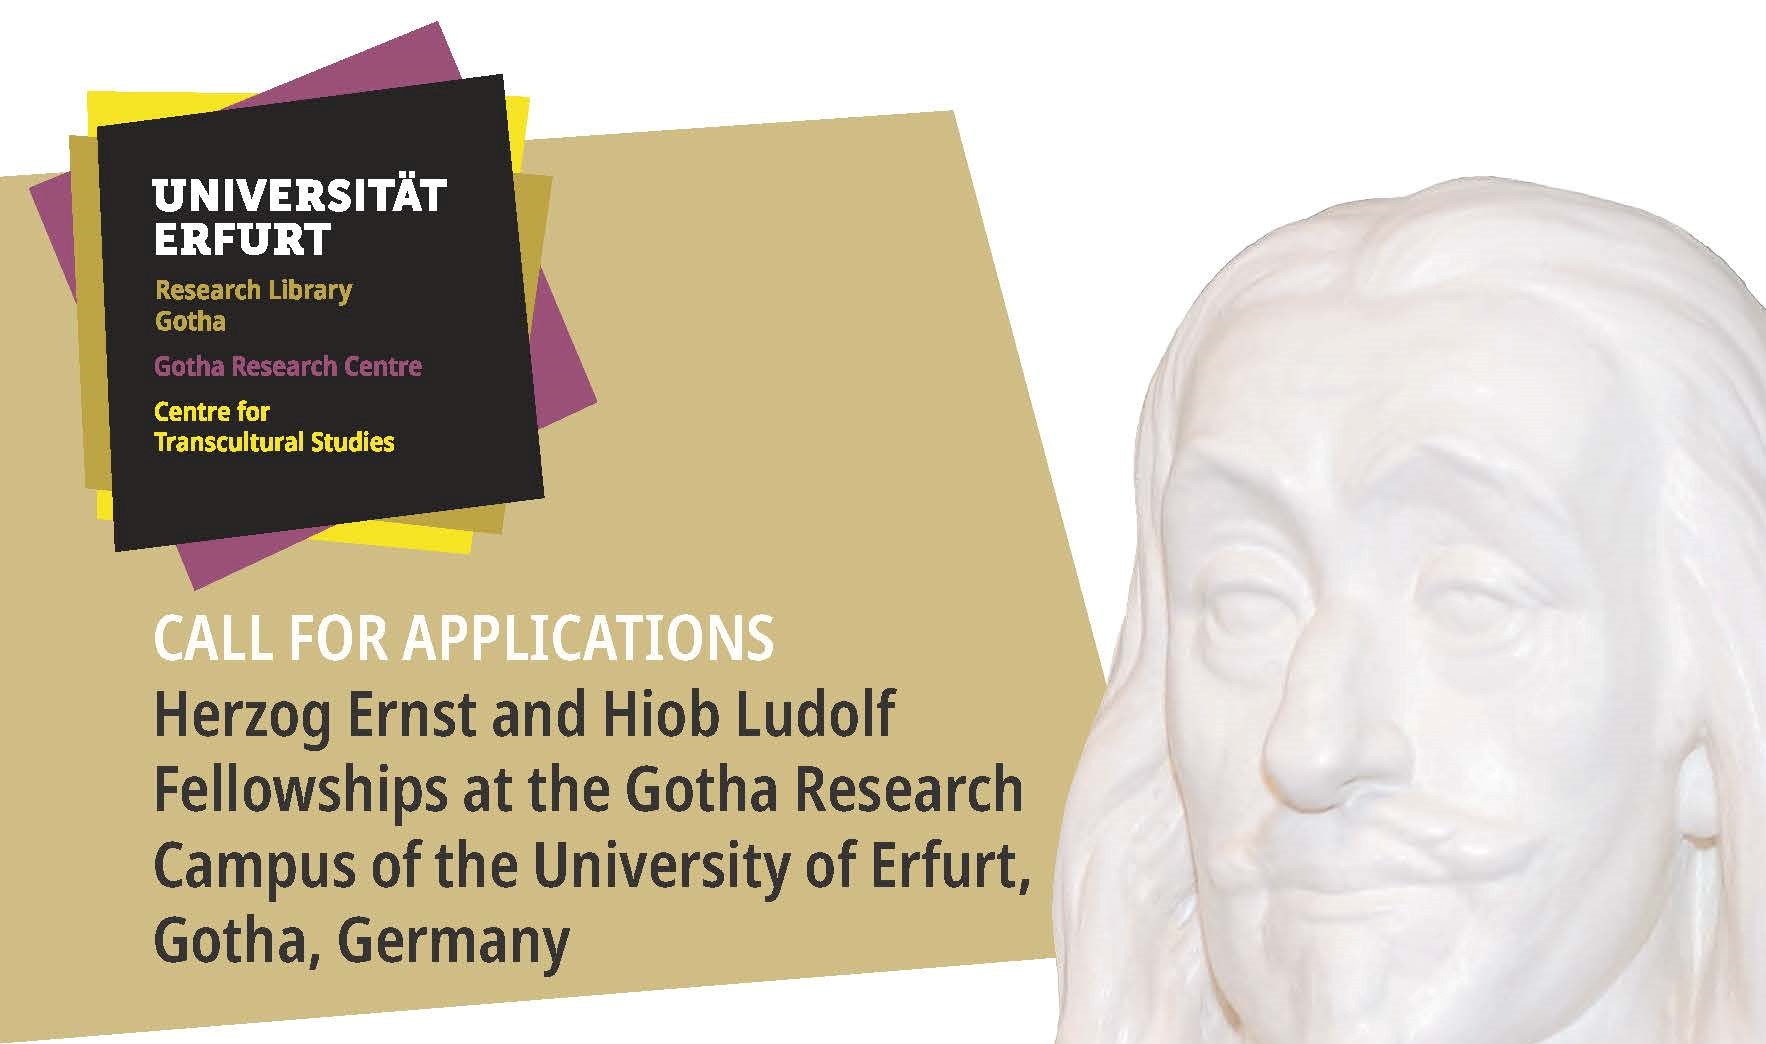 Research Grant for the Gotha Research Library